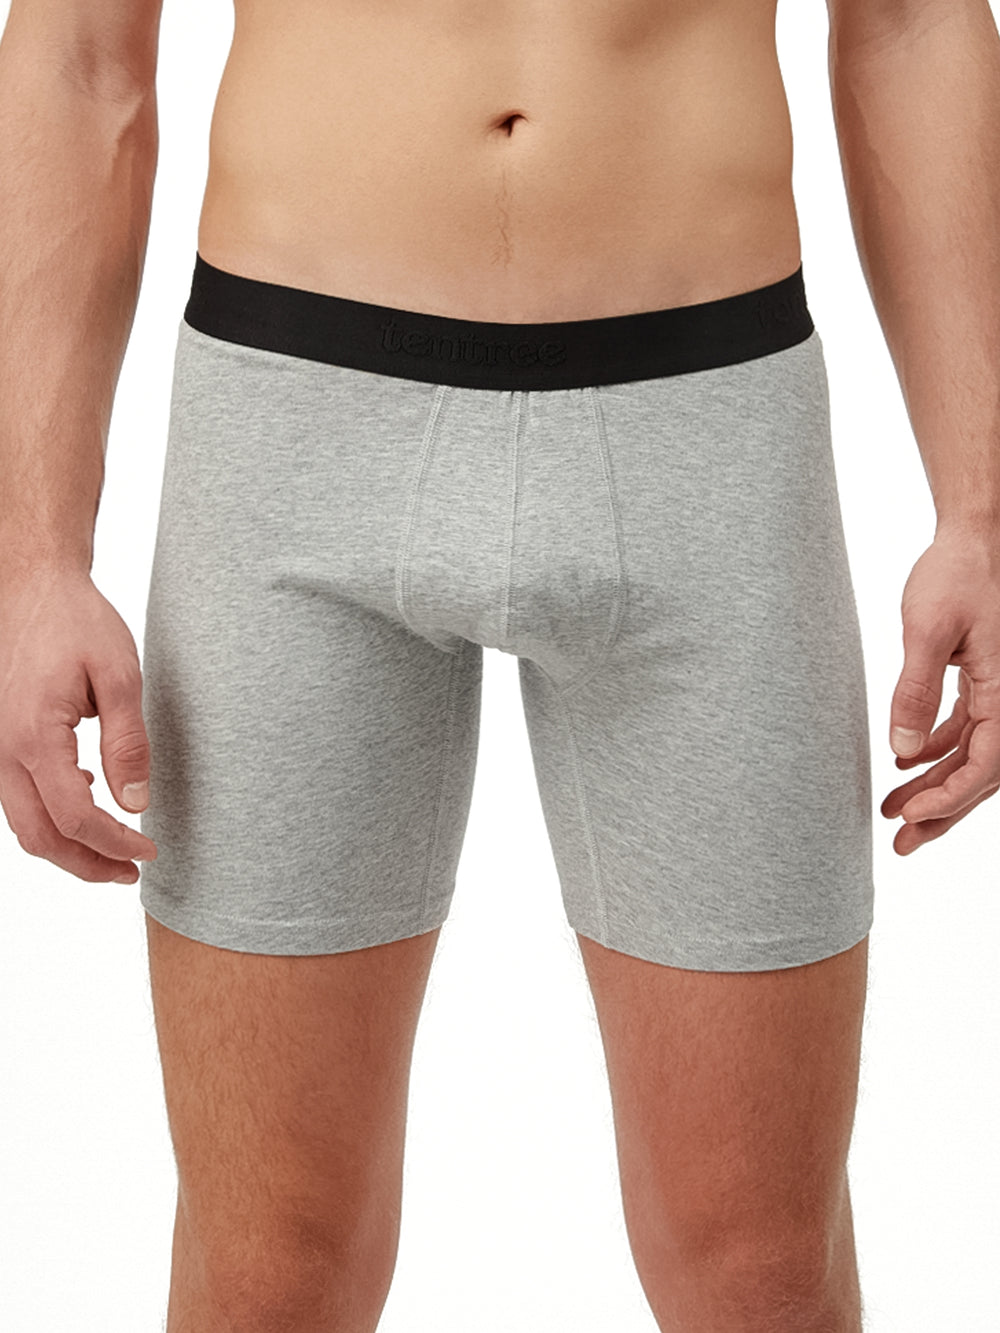 TENTREE 7" BOXER BRIEFING - CLEARANCE